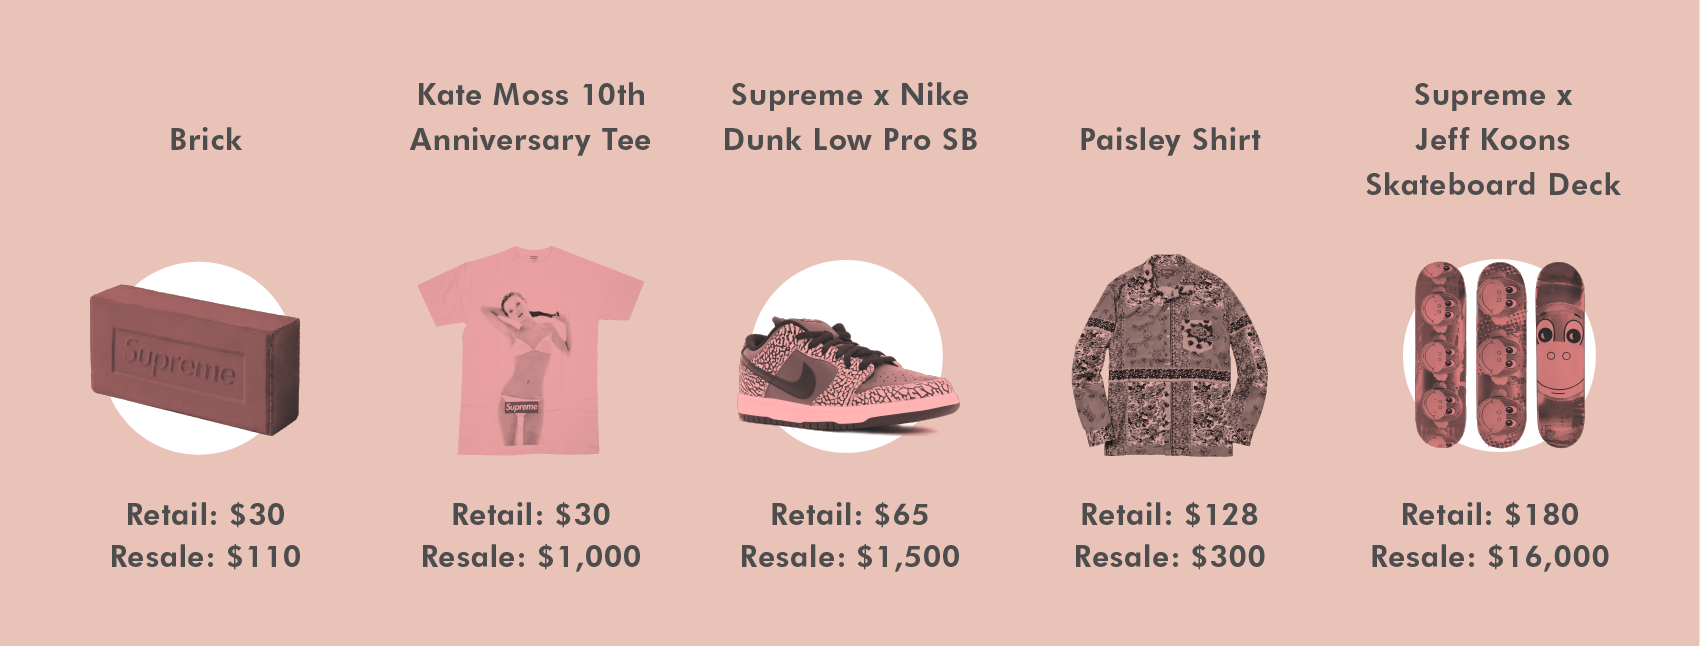 Screenshot showing a variety of items by Supreme and their retail prices/street values